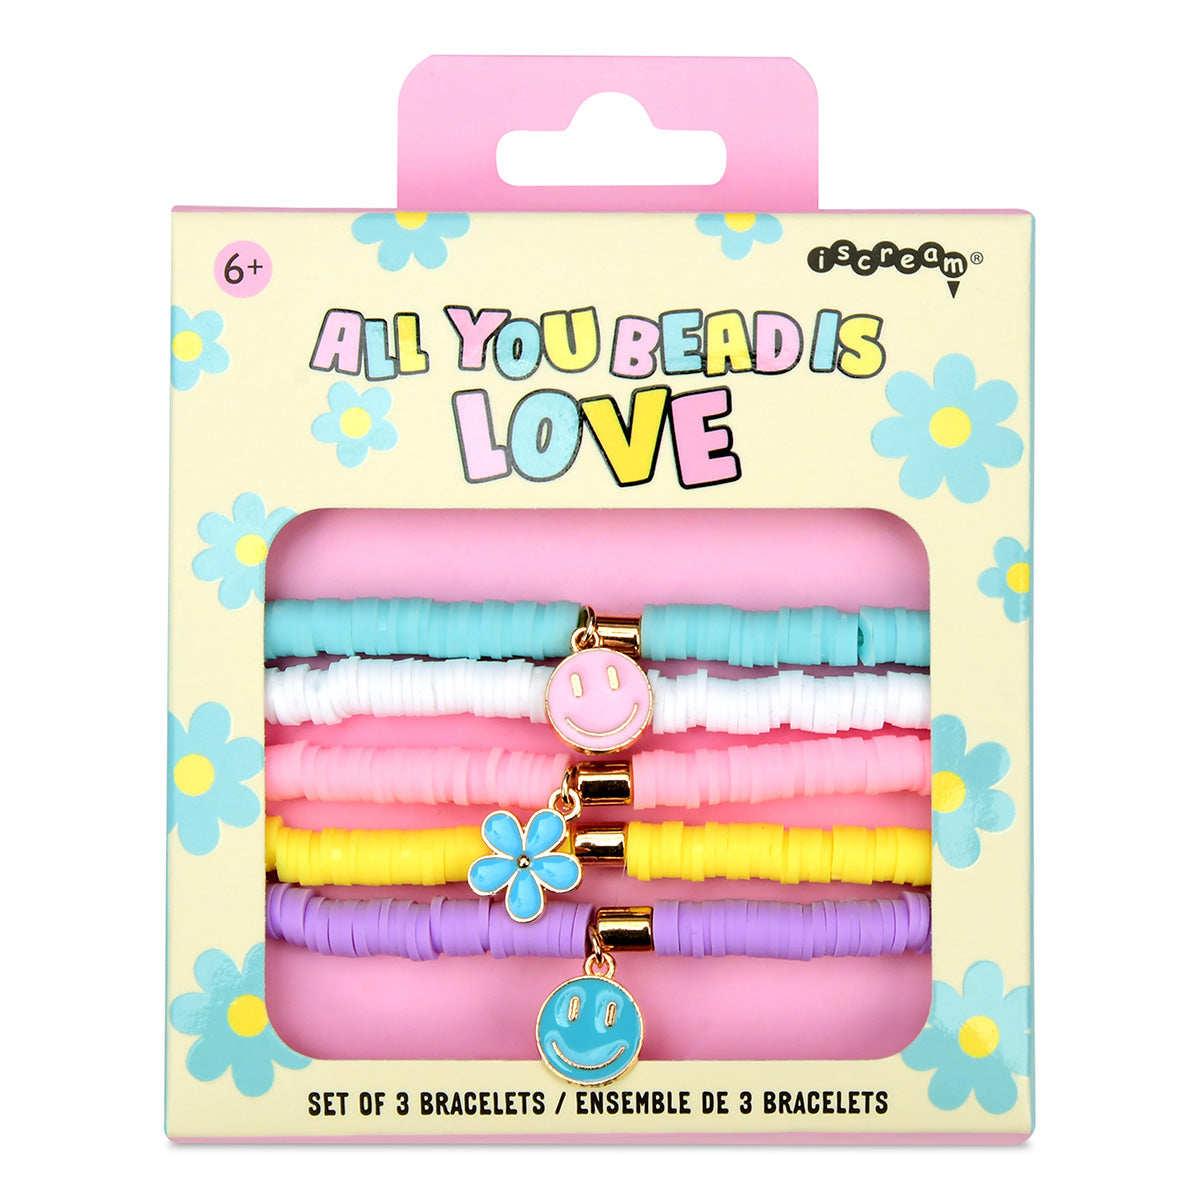 All You Bead Is Love Bracelet Set Cover